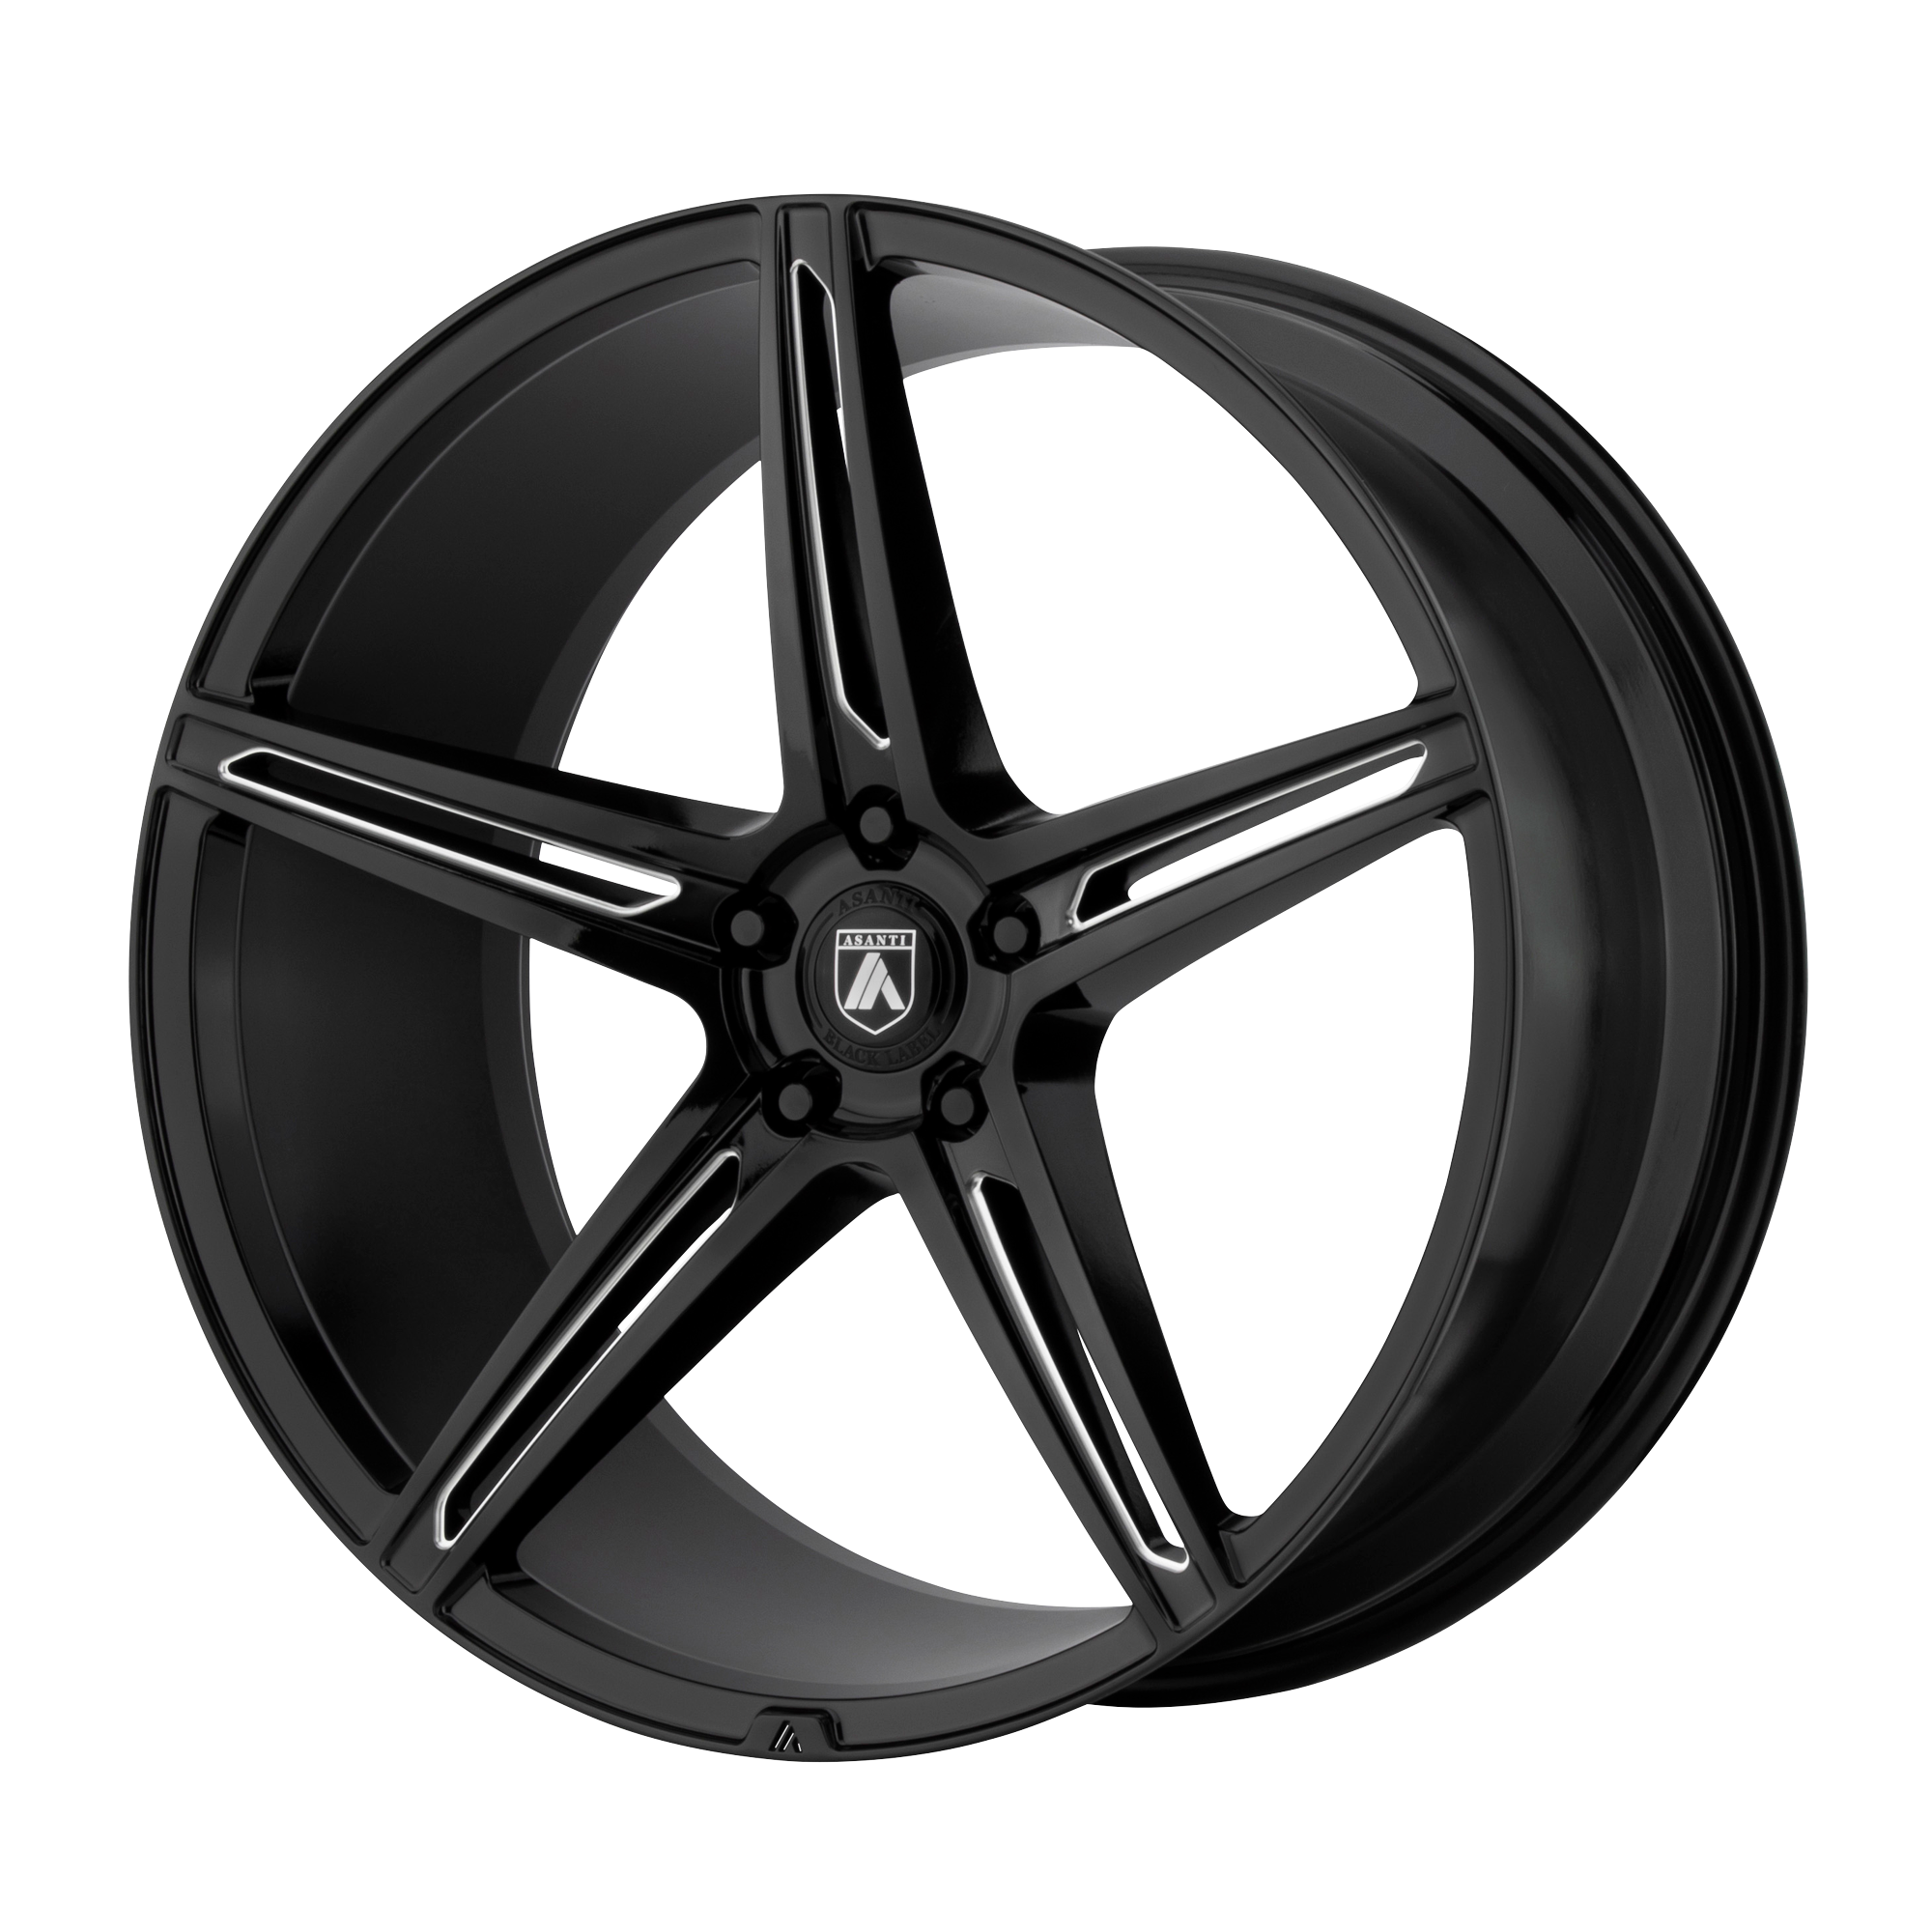 ALPHA 5 22x9 5x115.00 GLOSS BLACK MILLED (15 mm) - Tires and Engine Performance